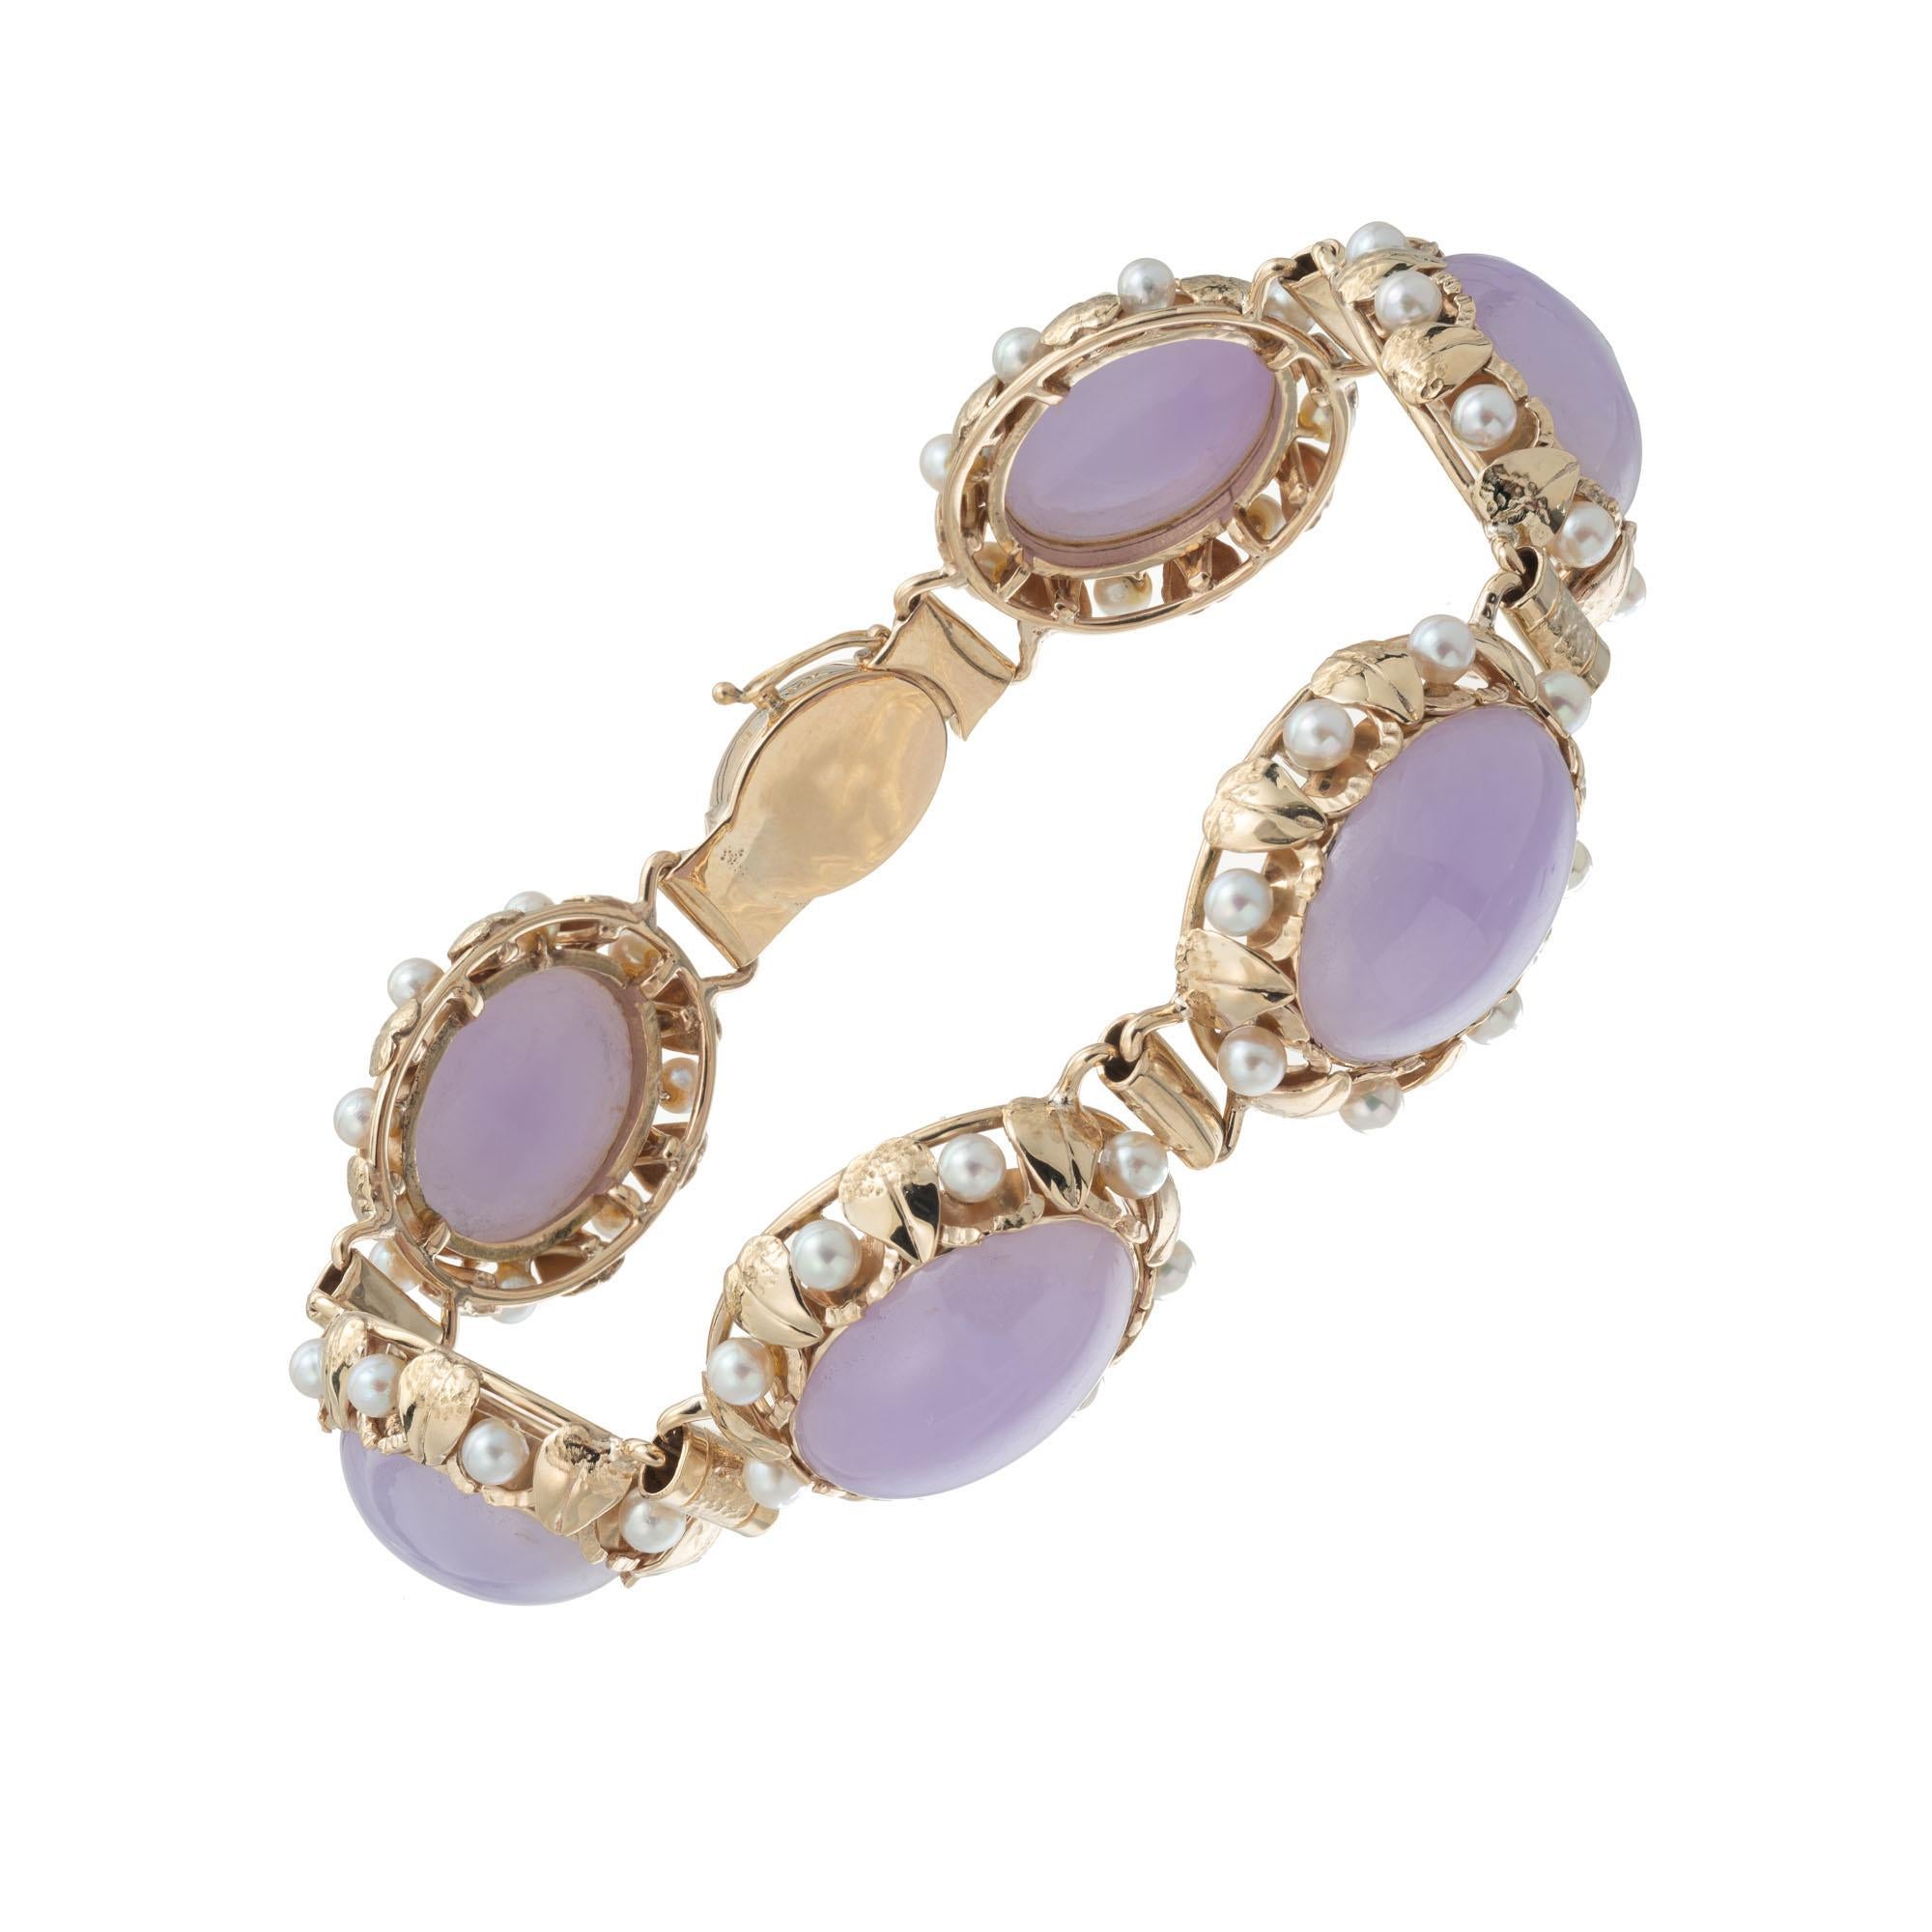 Jade and pearl link bracelet. GIA Certified natural untreated purple translucent jadeite jade bracelet accented with 48 cultured white grey pearls in 14k yellow gold. Signed Mings. 8 inches in length. 

6 oval cabochon purple jade, GIA Certificate #